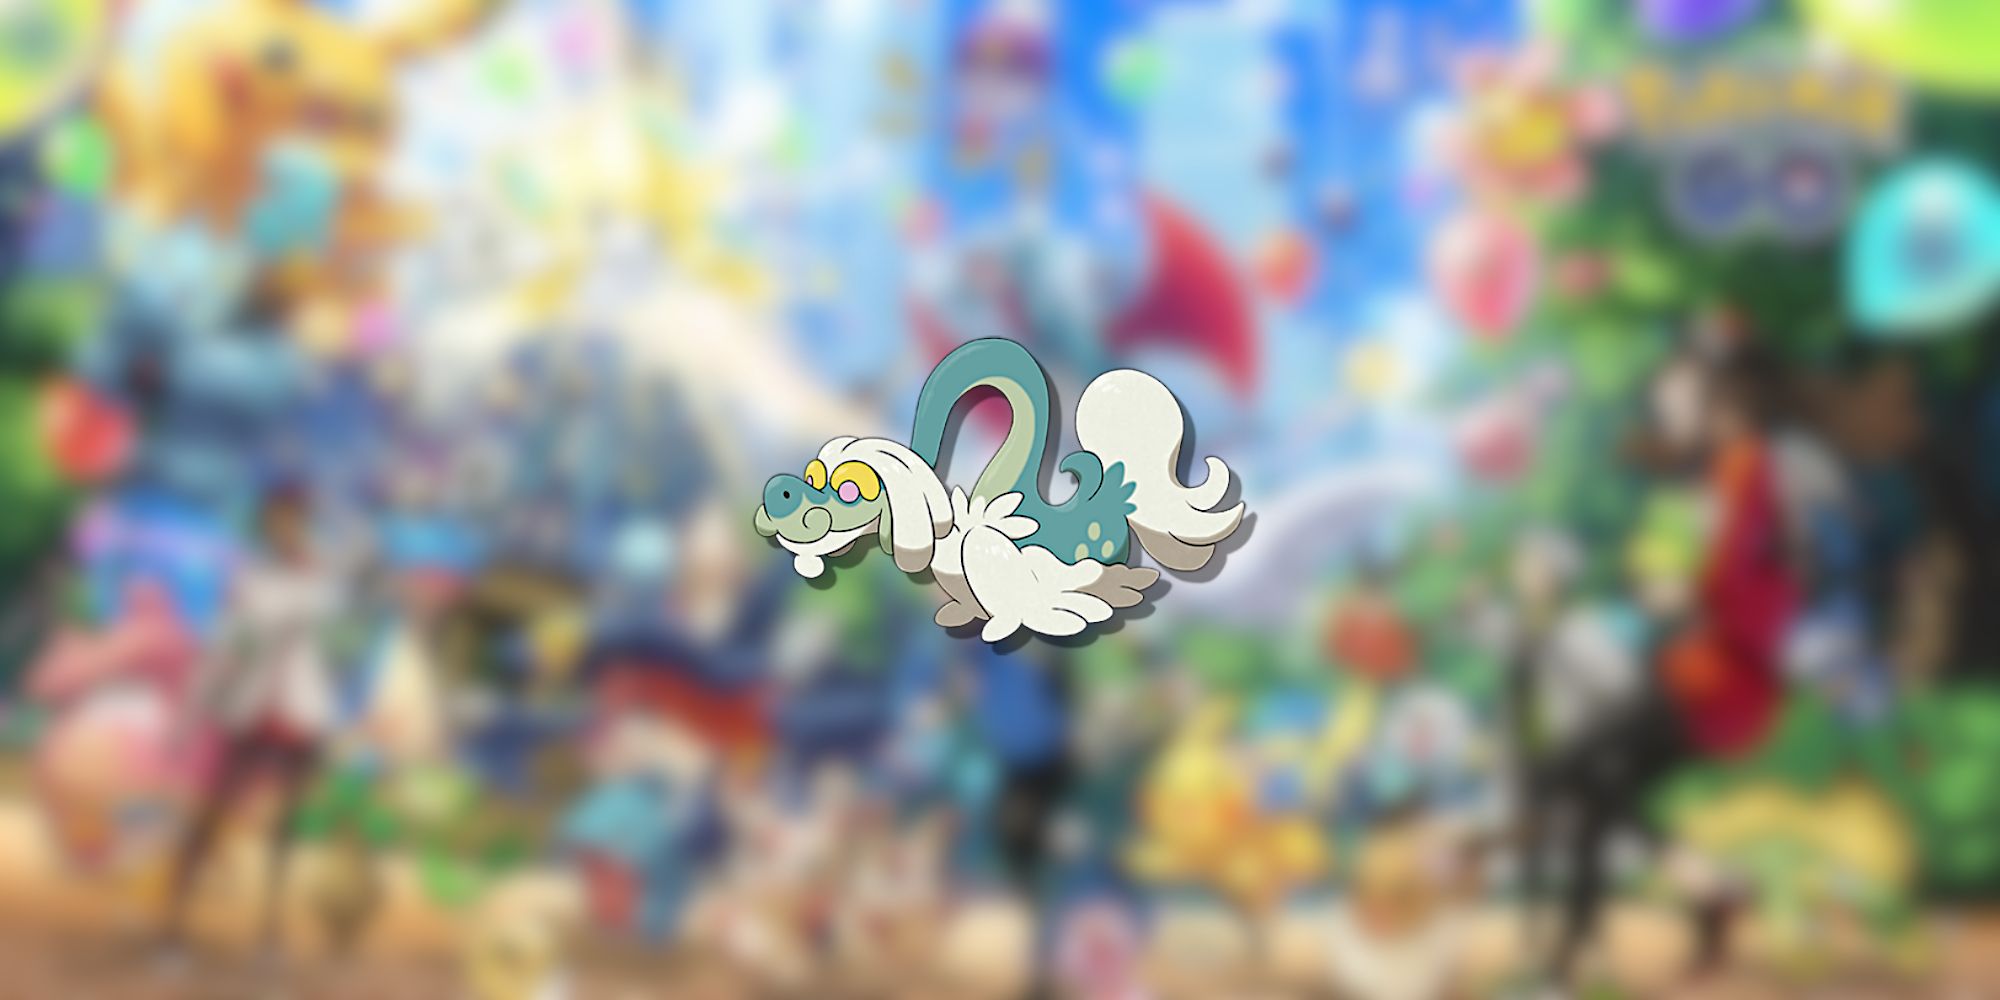 Image of Drampa in the foreground from Pokemon GO